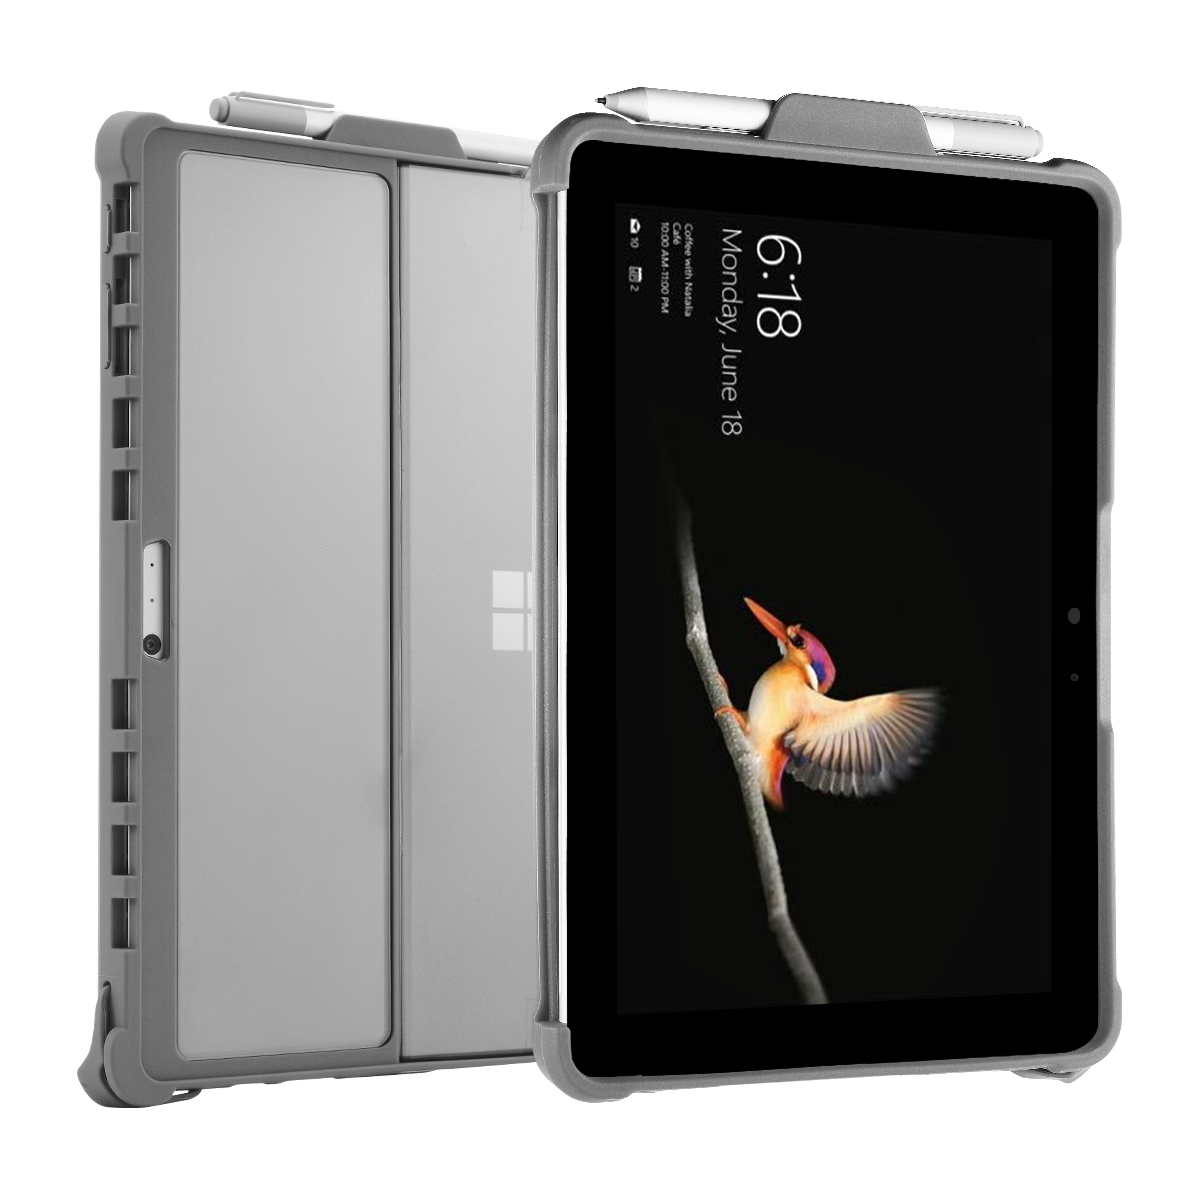 Rugged Folio Protective Cover Compatible with Type Cover, Kickstand case for Surface Pro 4/5/6/7/7 Plus